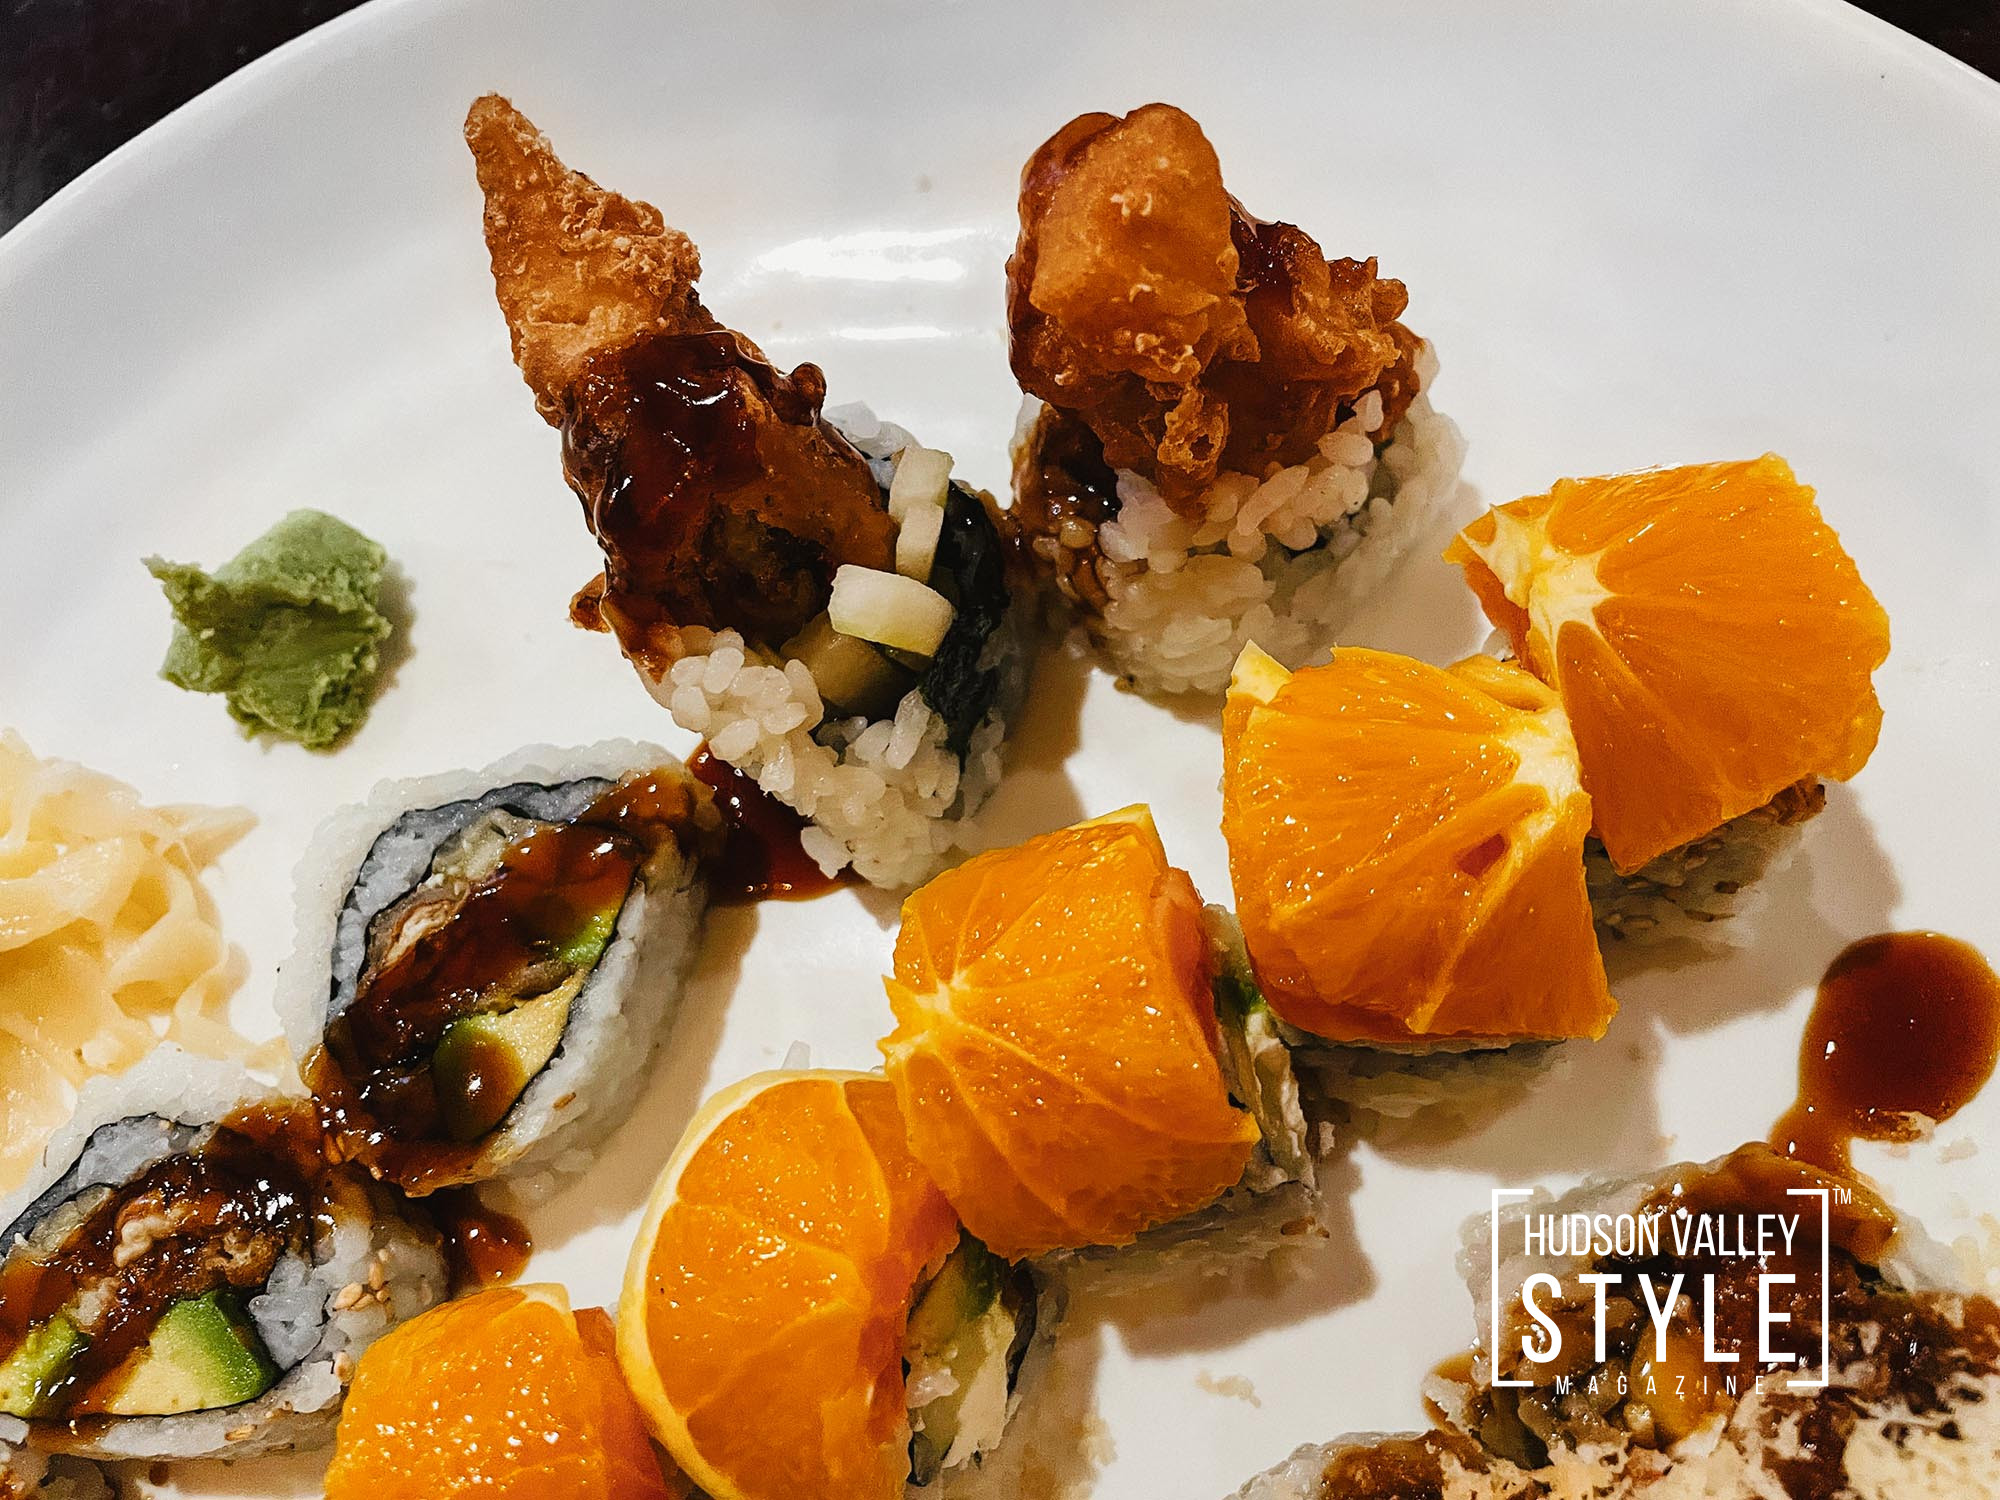 Tokyo Sushi in New Platz, NY: A Rhapsody in Freshness and Flavor – Restaurant Reviews with Maxwell Alexander – Presented by Alluvion Vacations